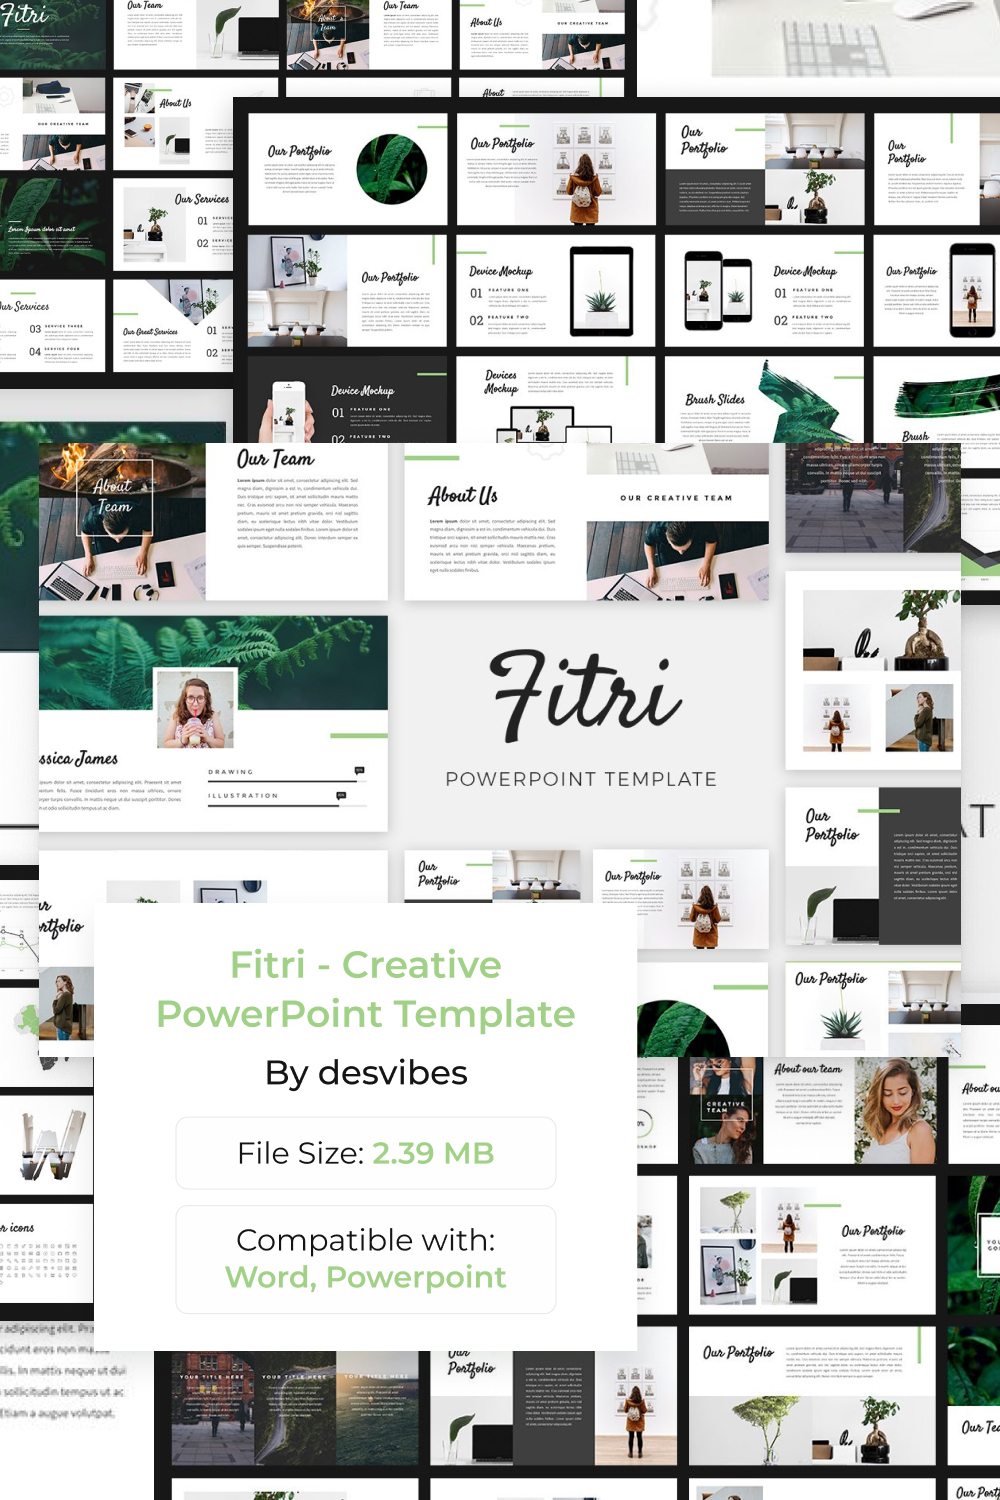 Fitri - Creative PowerPoint Template by MasterBundles Pinterest Collage Image.